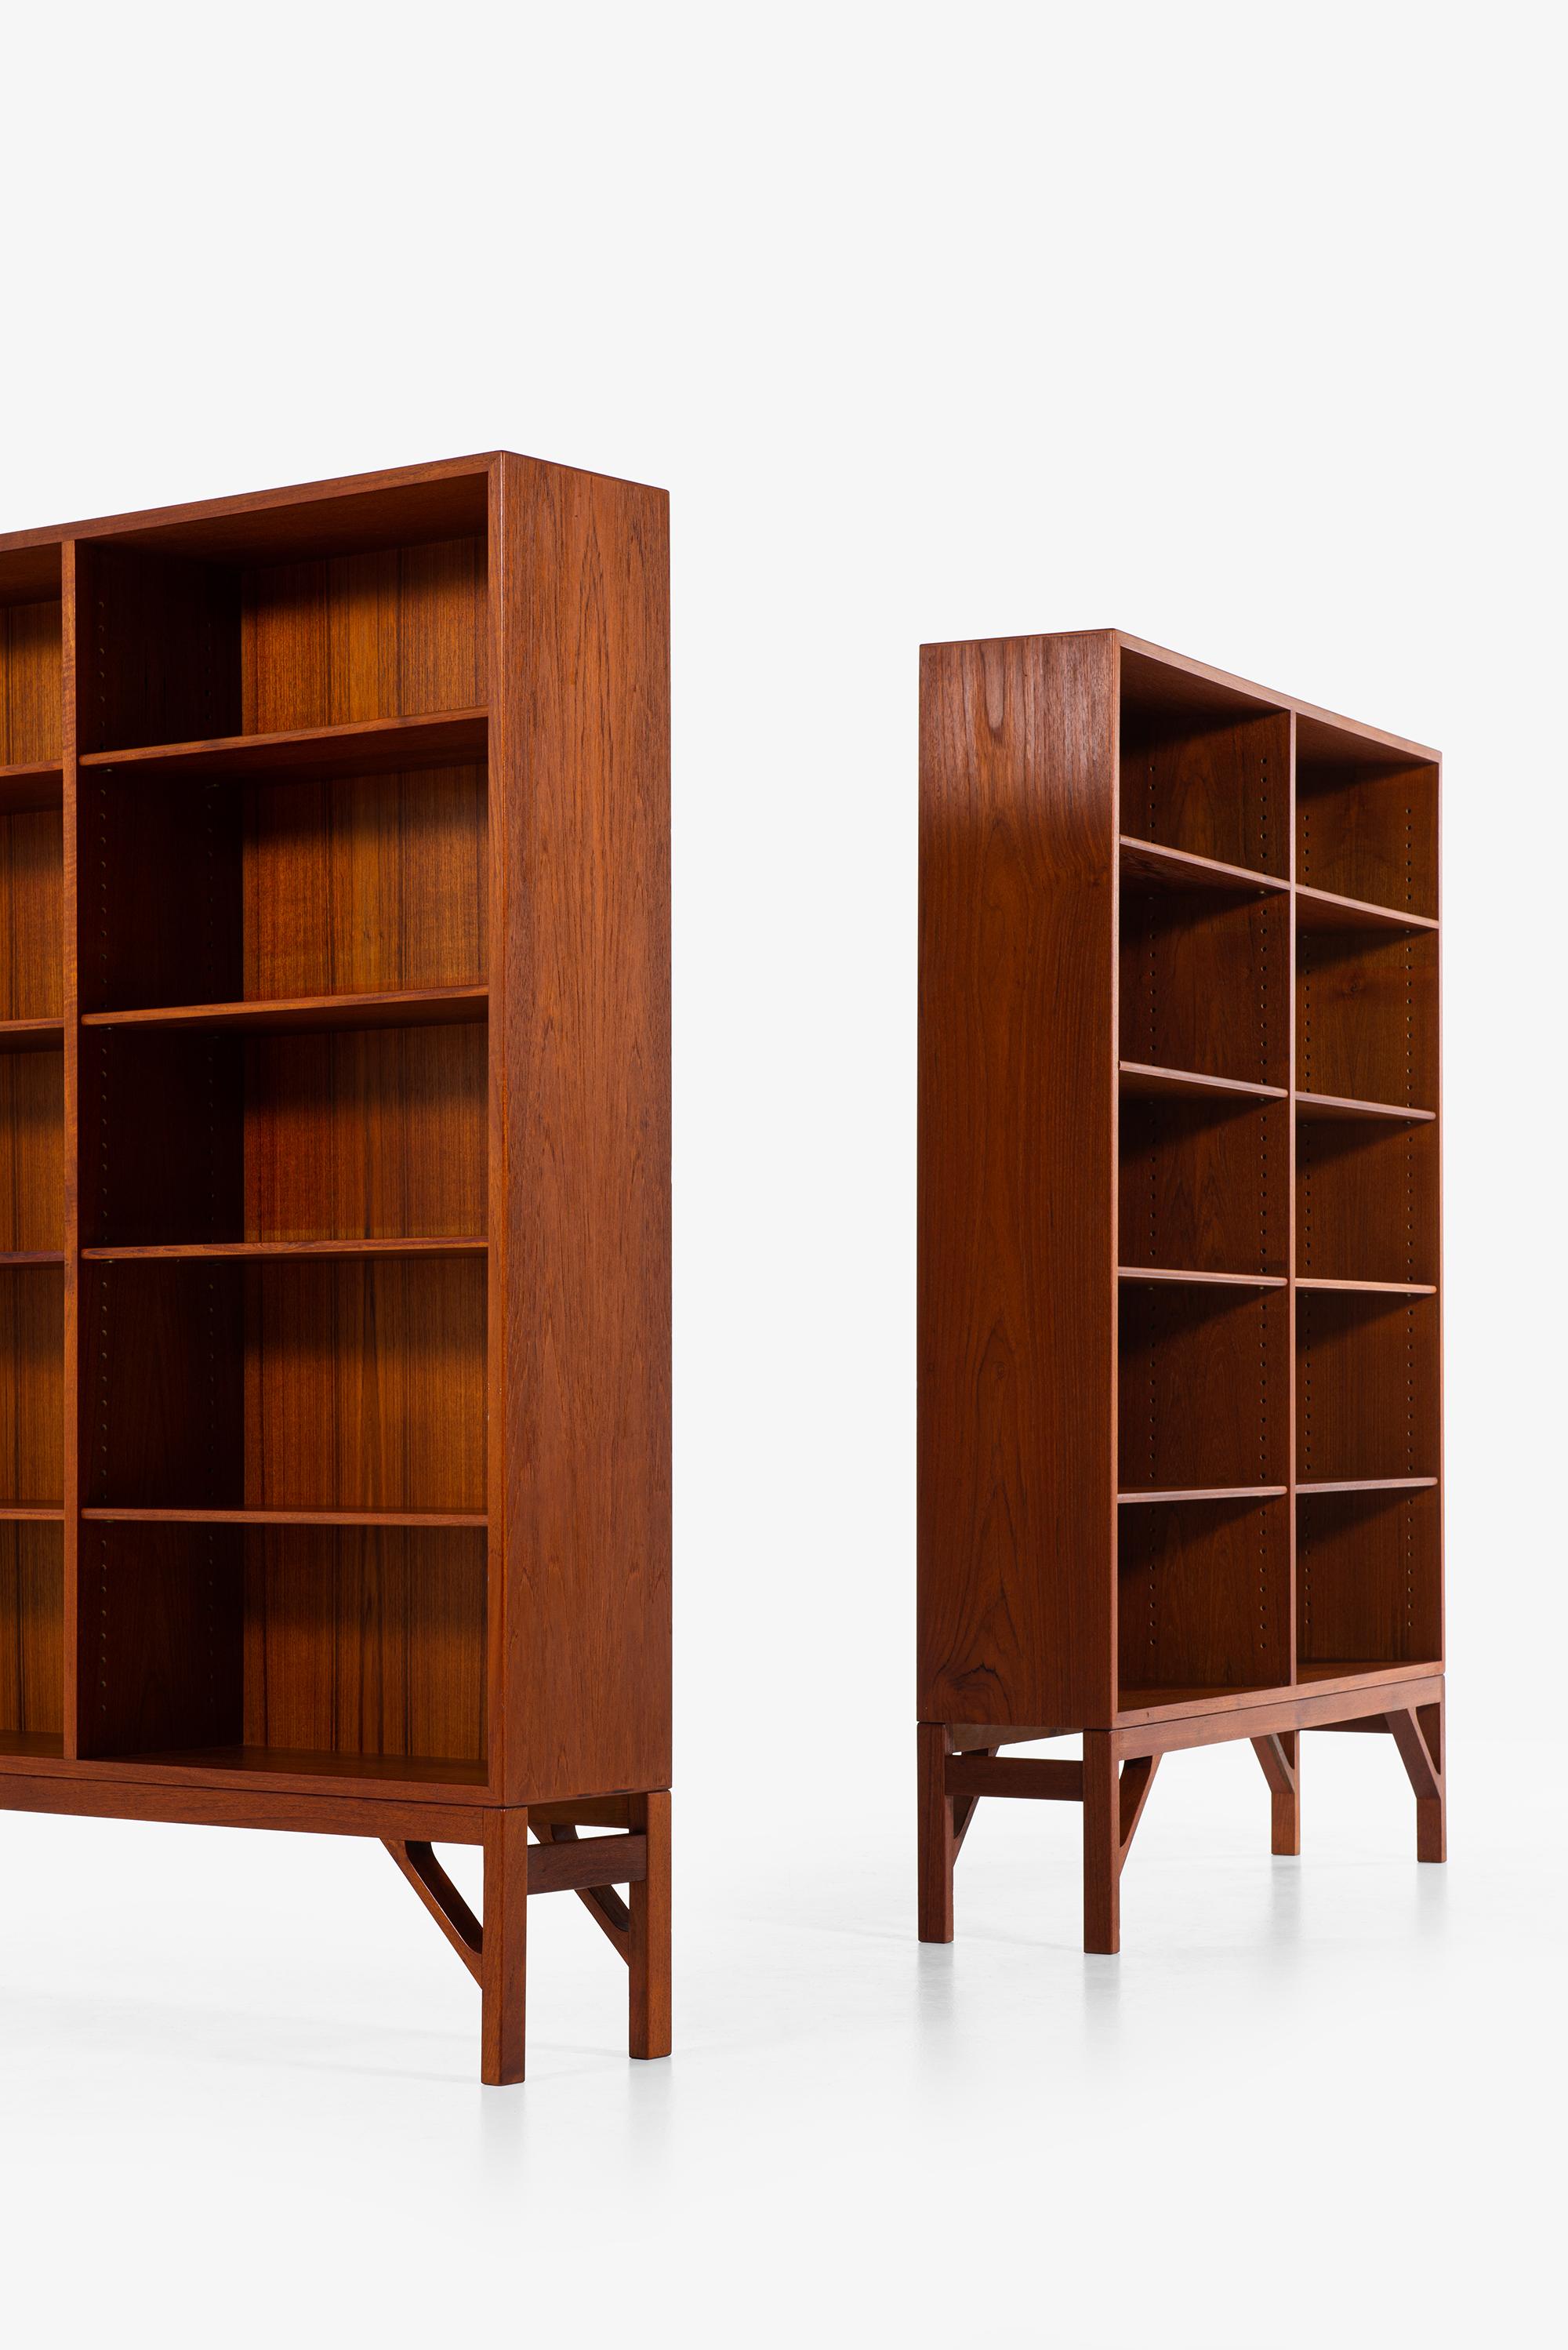 Mid-20th Century Børge Mogensen Bookcases Produced by C.M. Madsen in Denmark